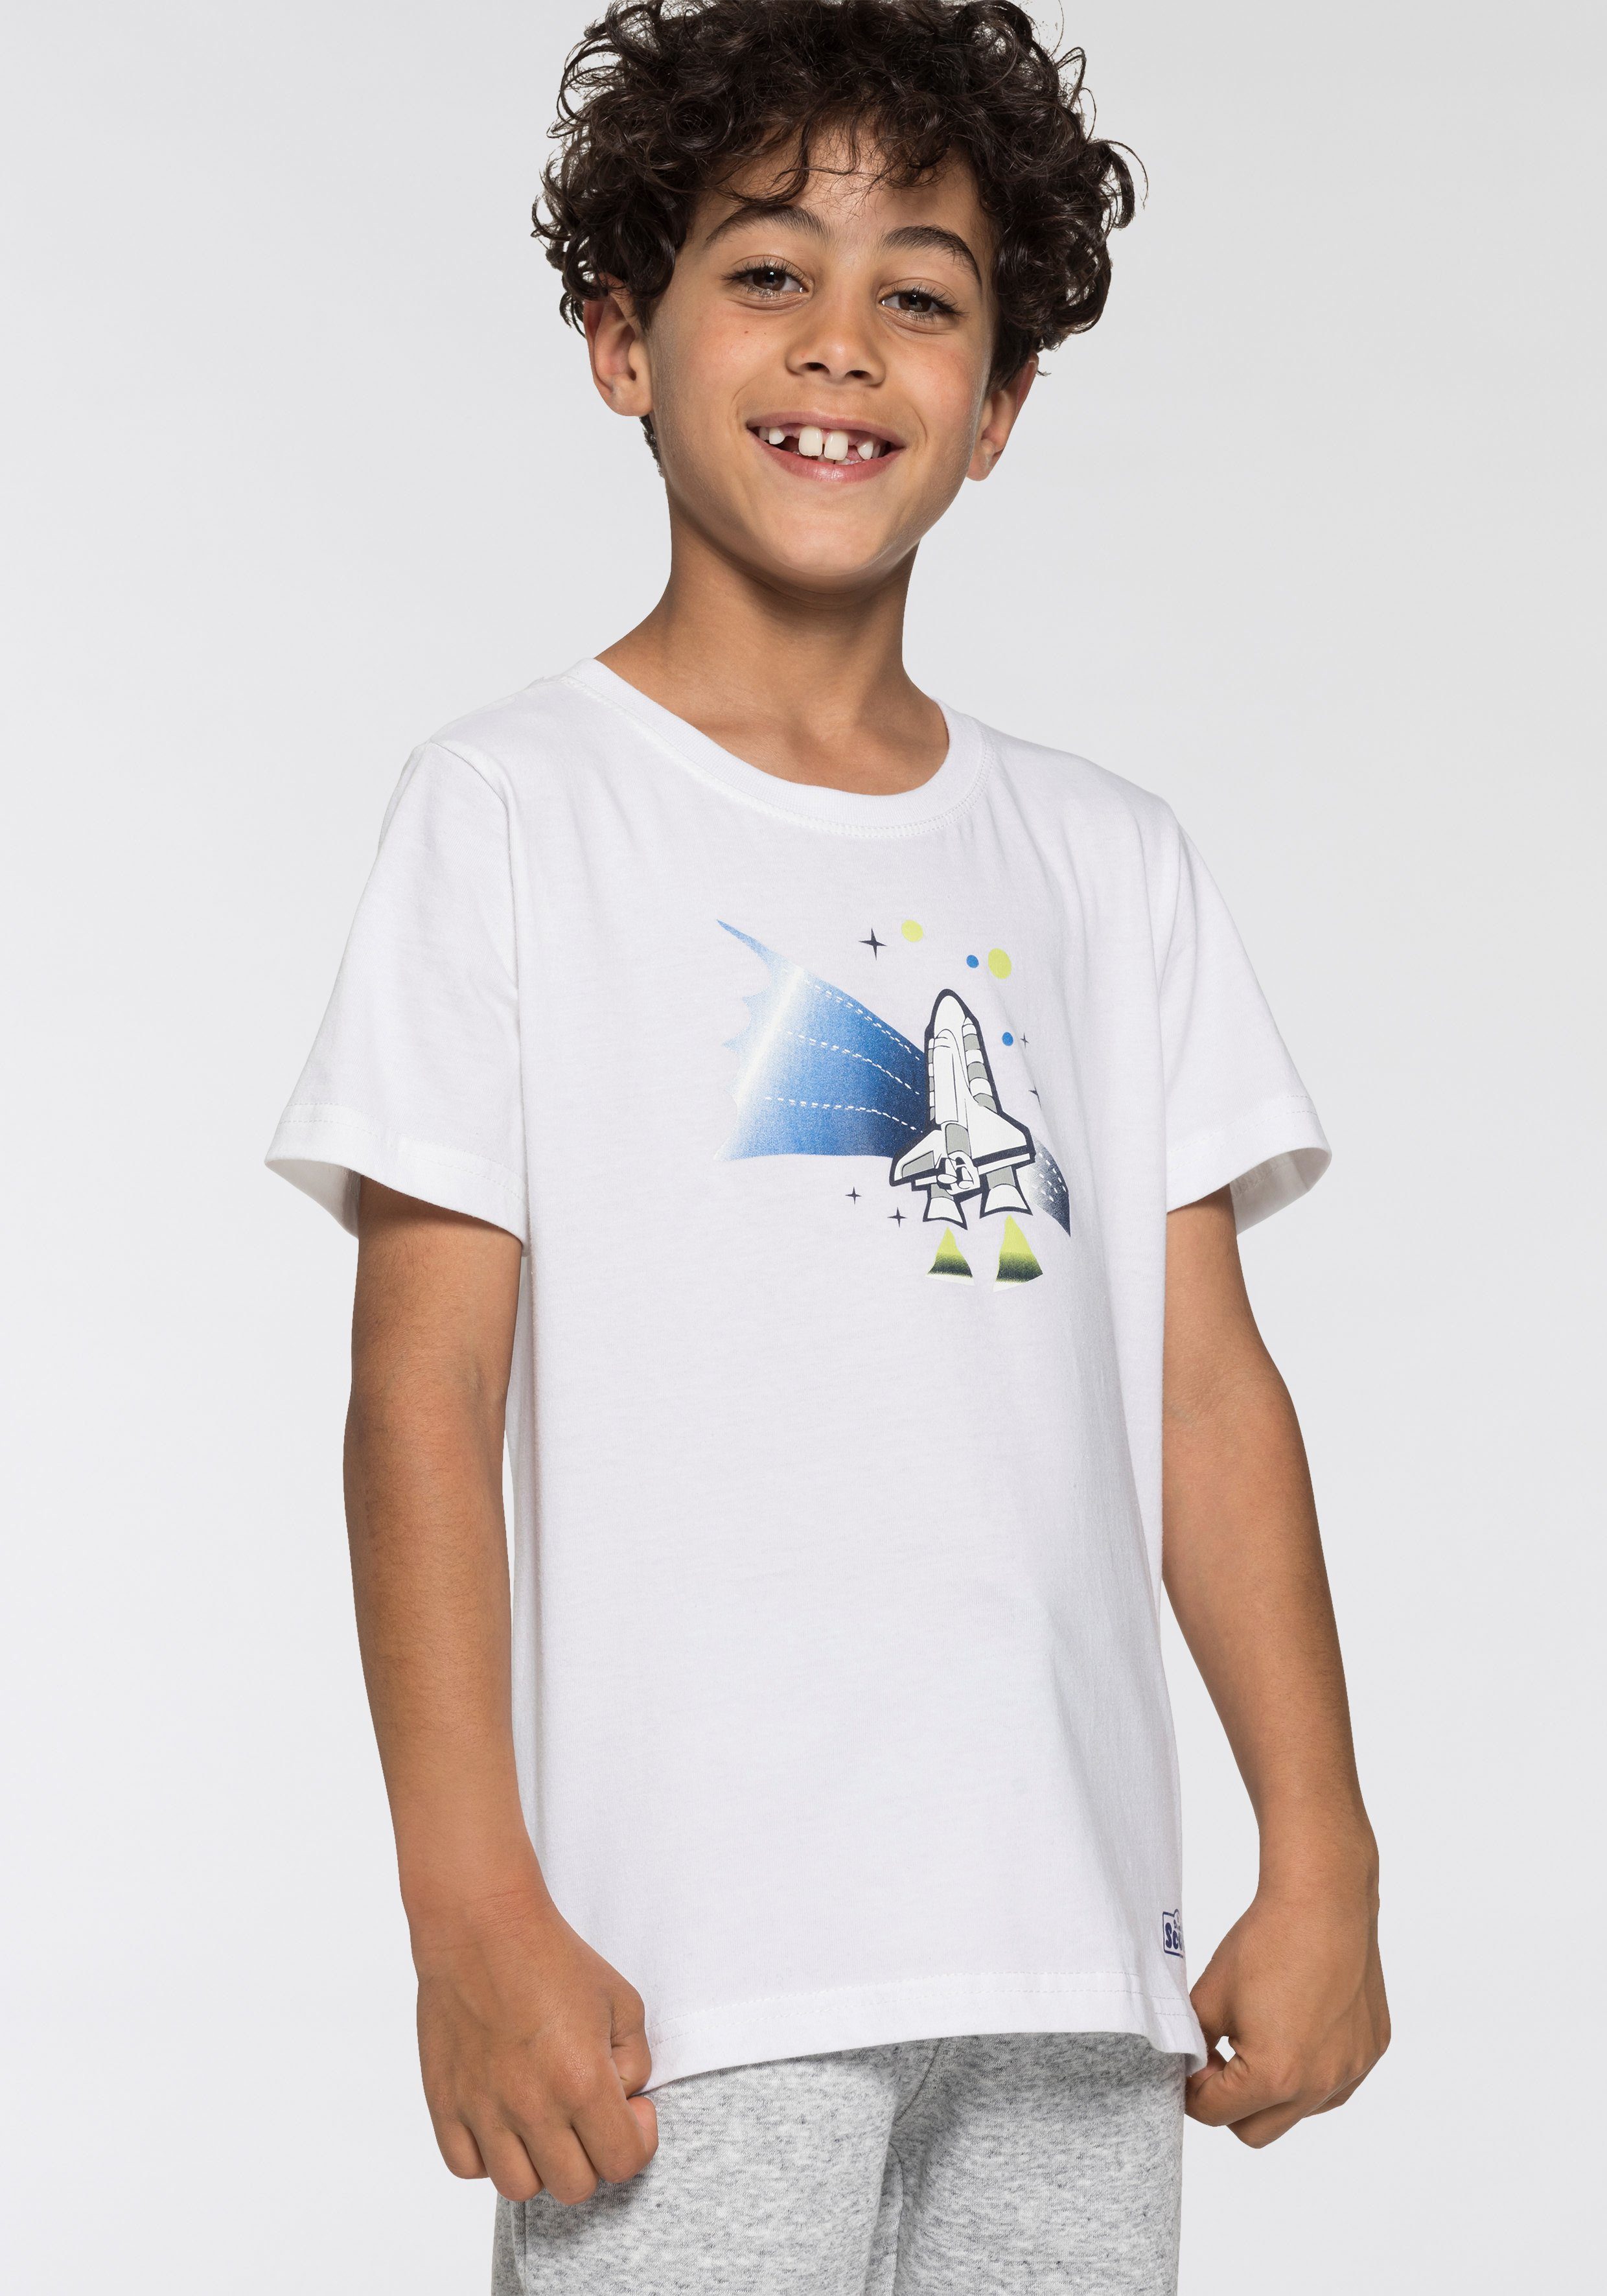 T-Shirt 2er-Pack) aus SPACE (Packung, Bio-Baumwolle Scout